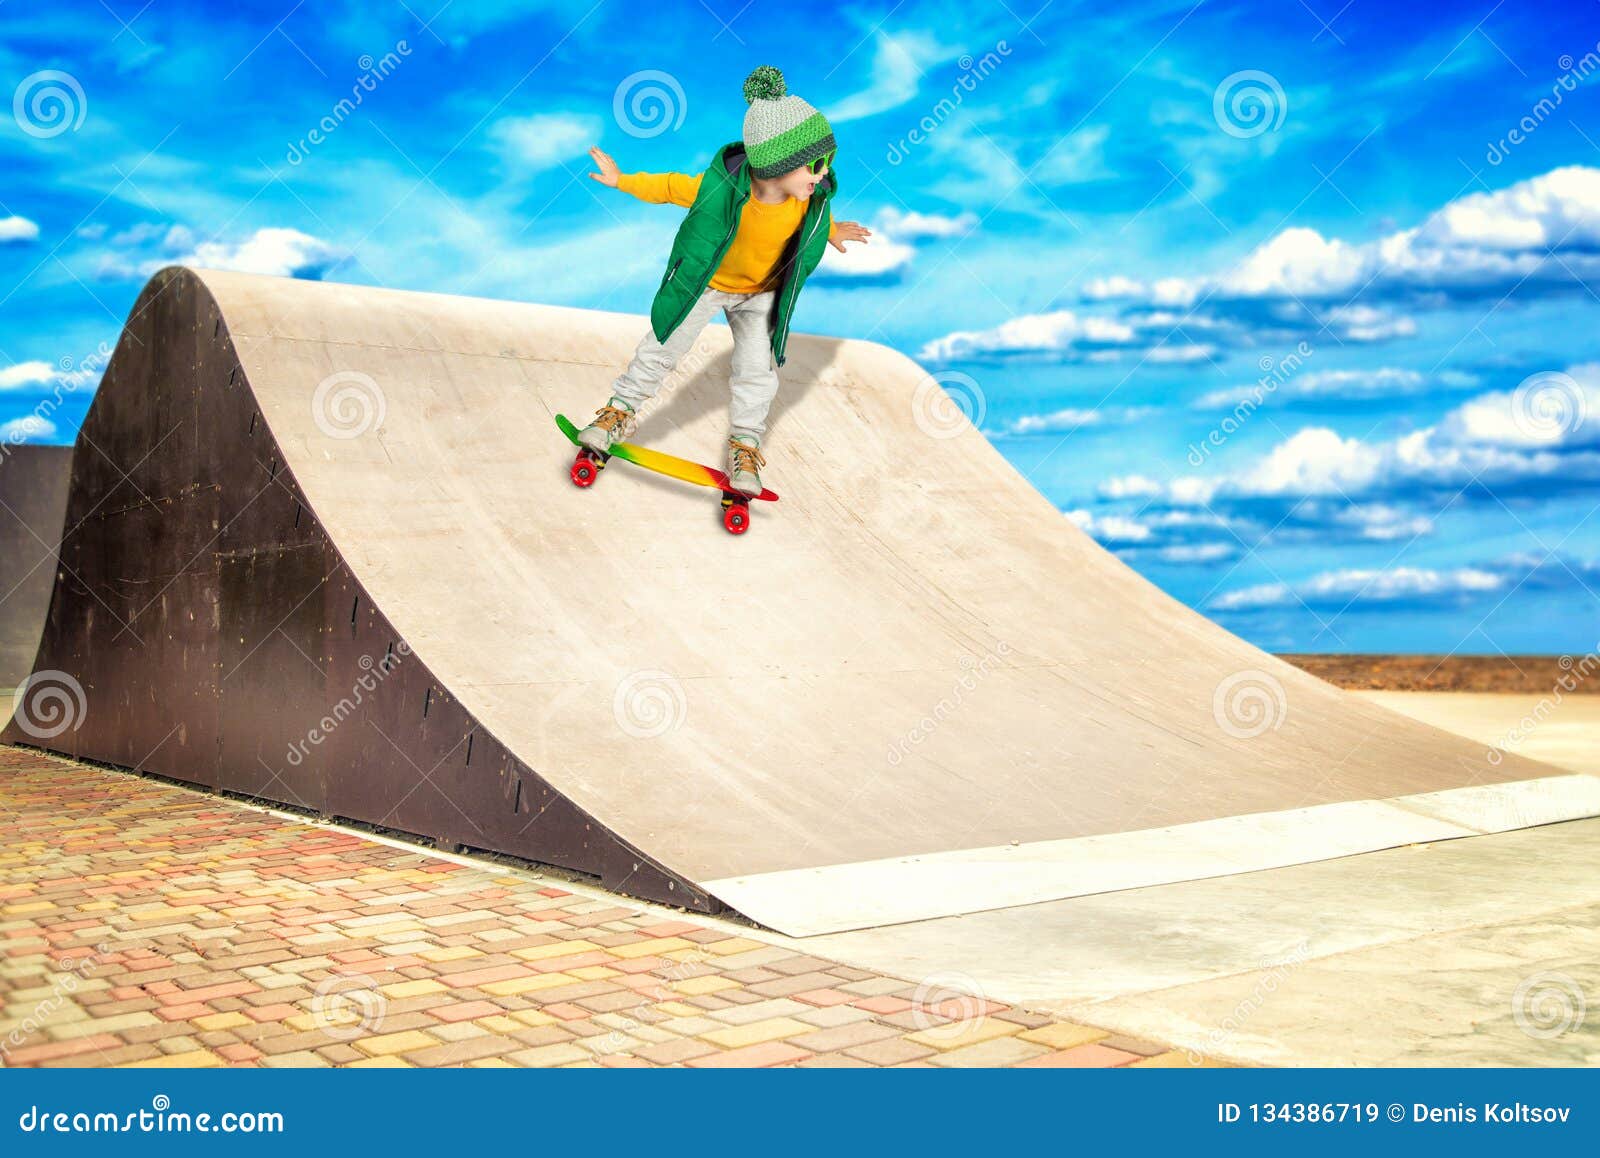 Groene achtergrond In zoomen Loodgieter Little Boy Riding on Steep Hills To Skateboard at the Skate Park.Extreme  Sports. Stock Image - Image of ride, break: 134386719